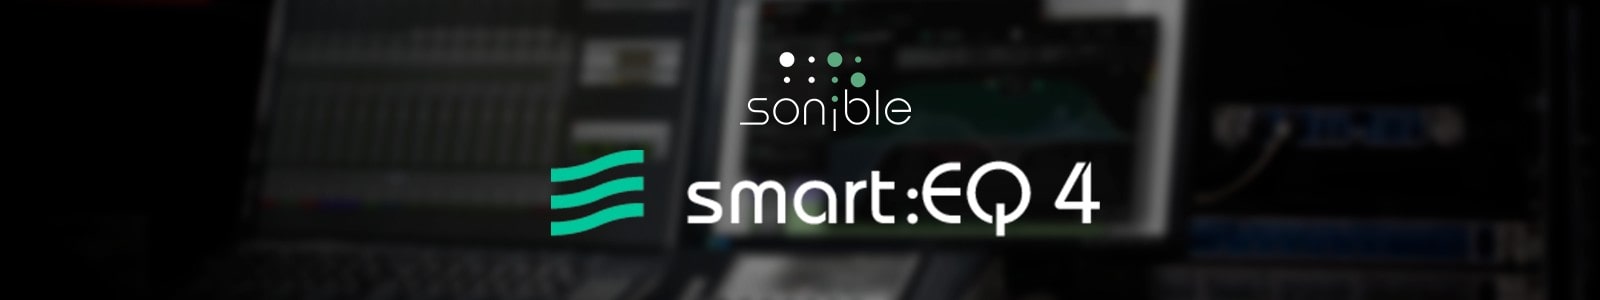 Smart:EQ 4 by Sonible